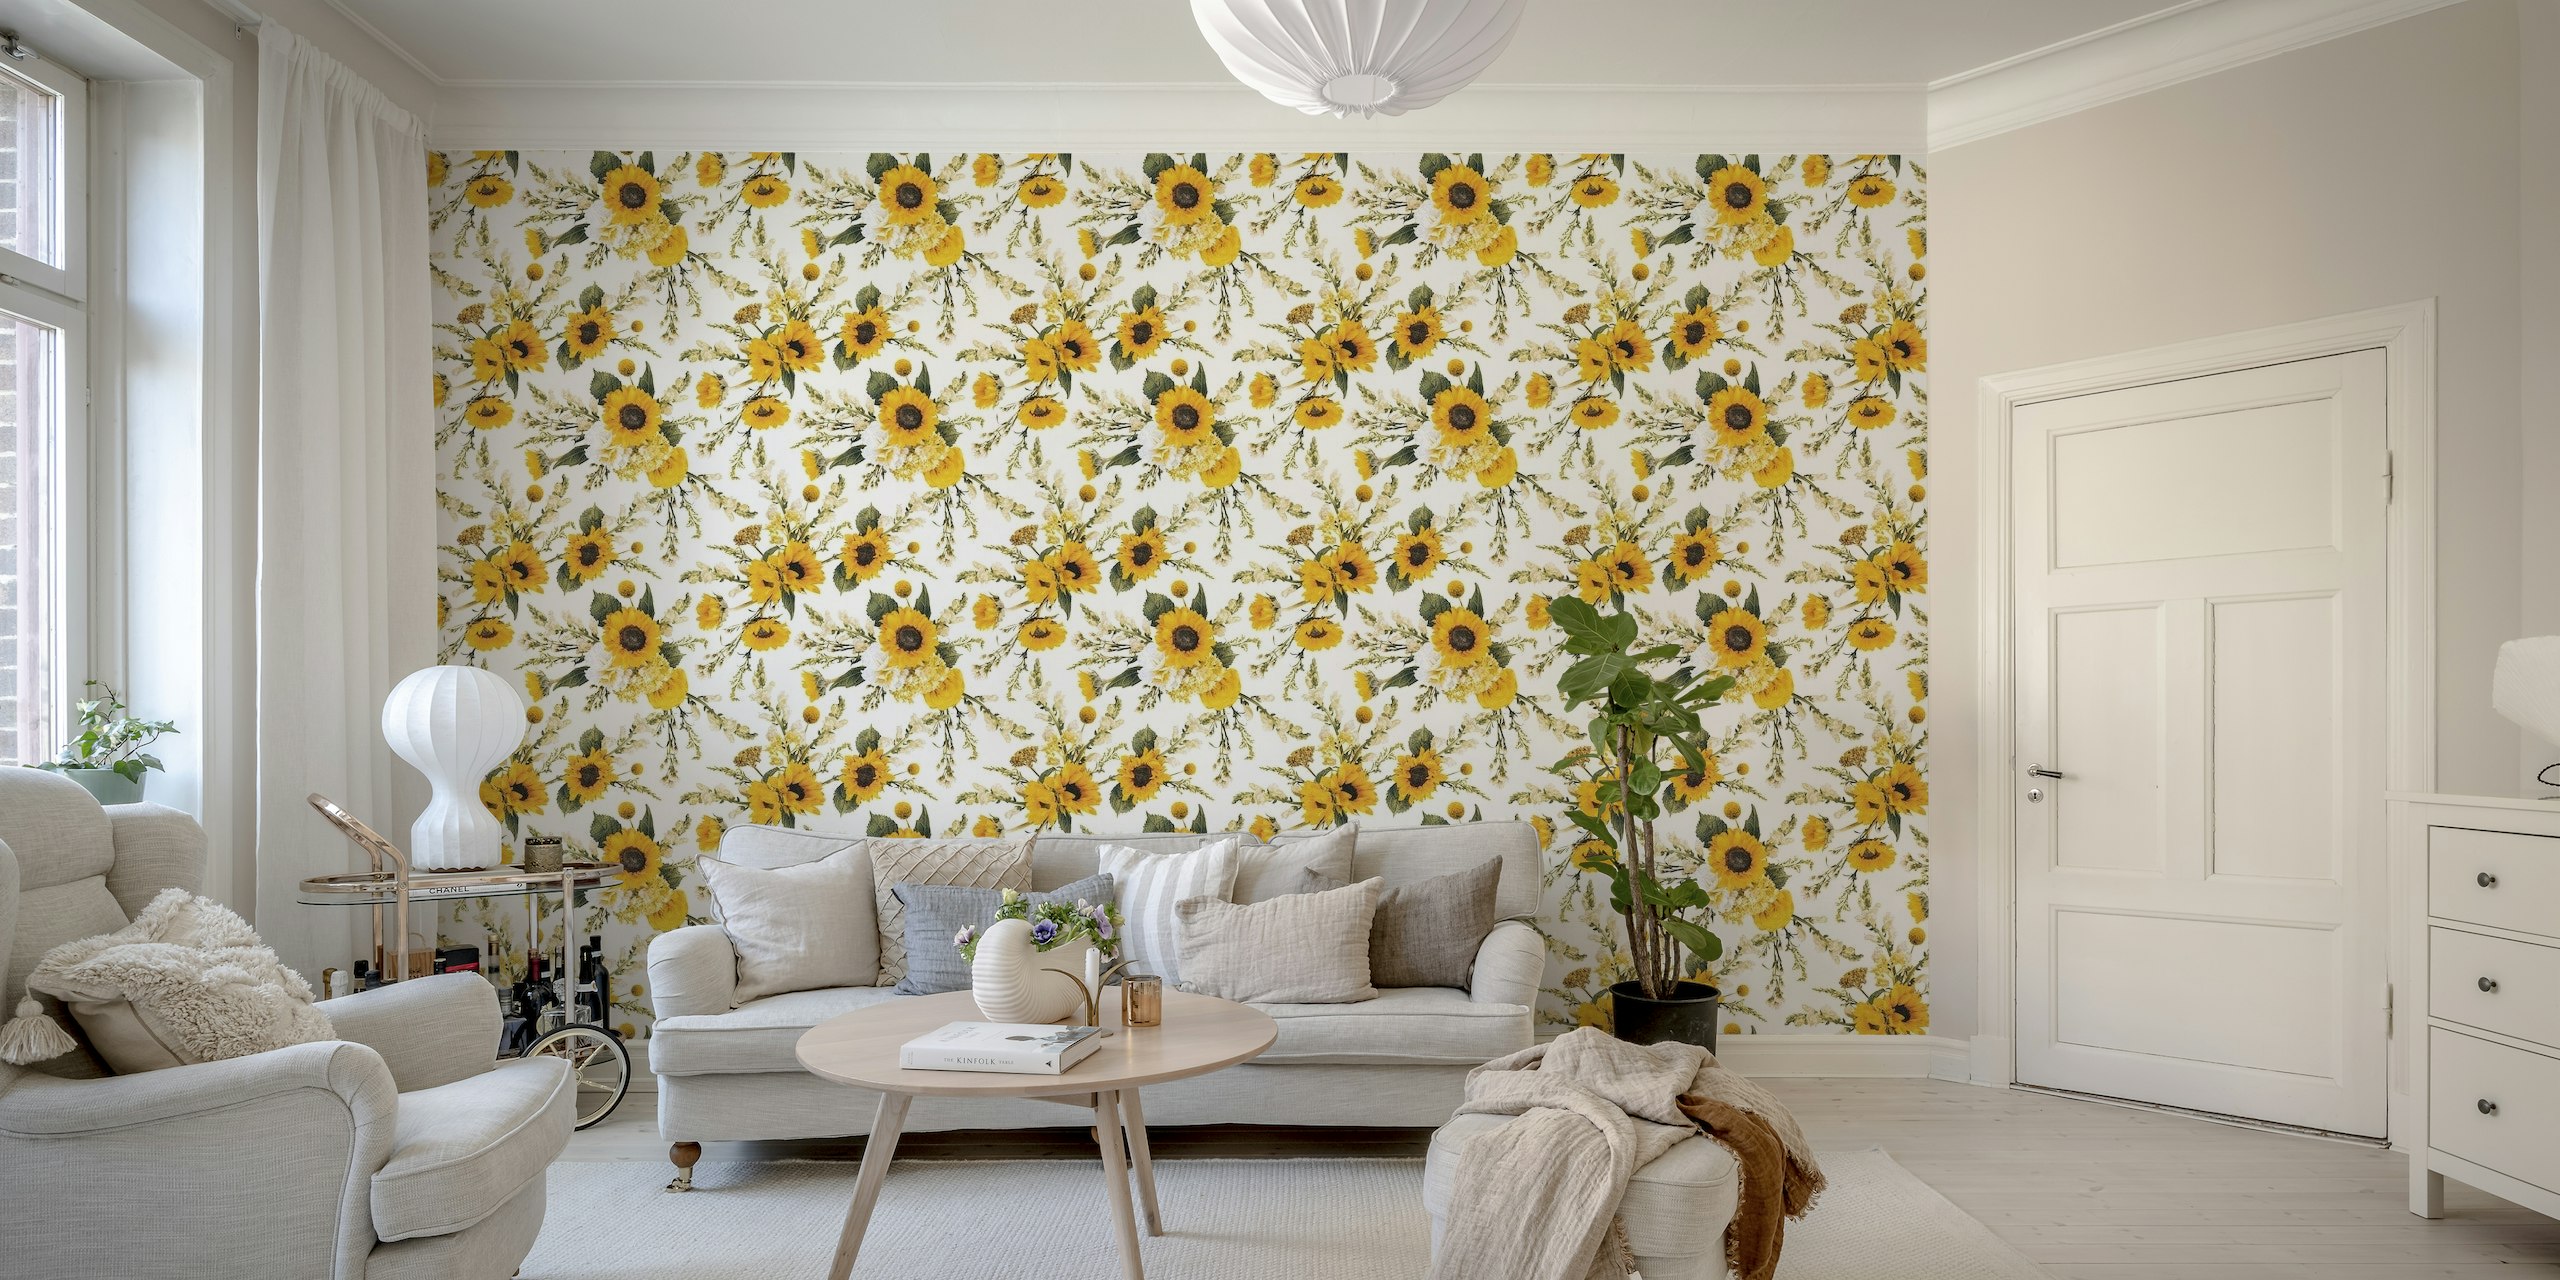 Bright and cheerful sunflower wall mural with intertwining wildflowers and greenery